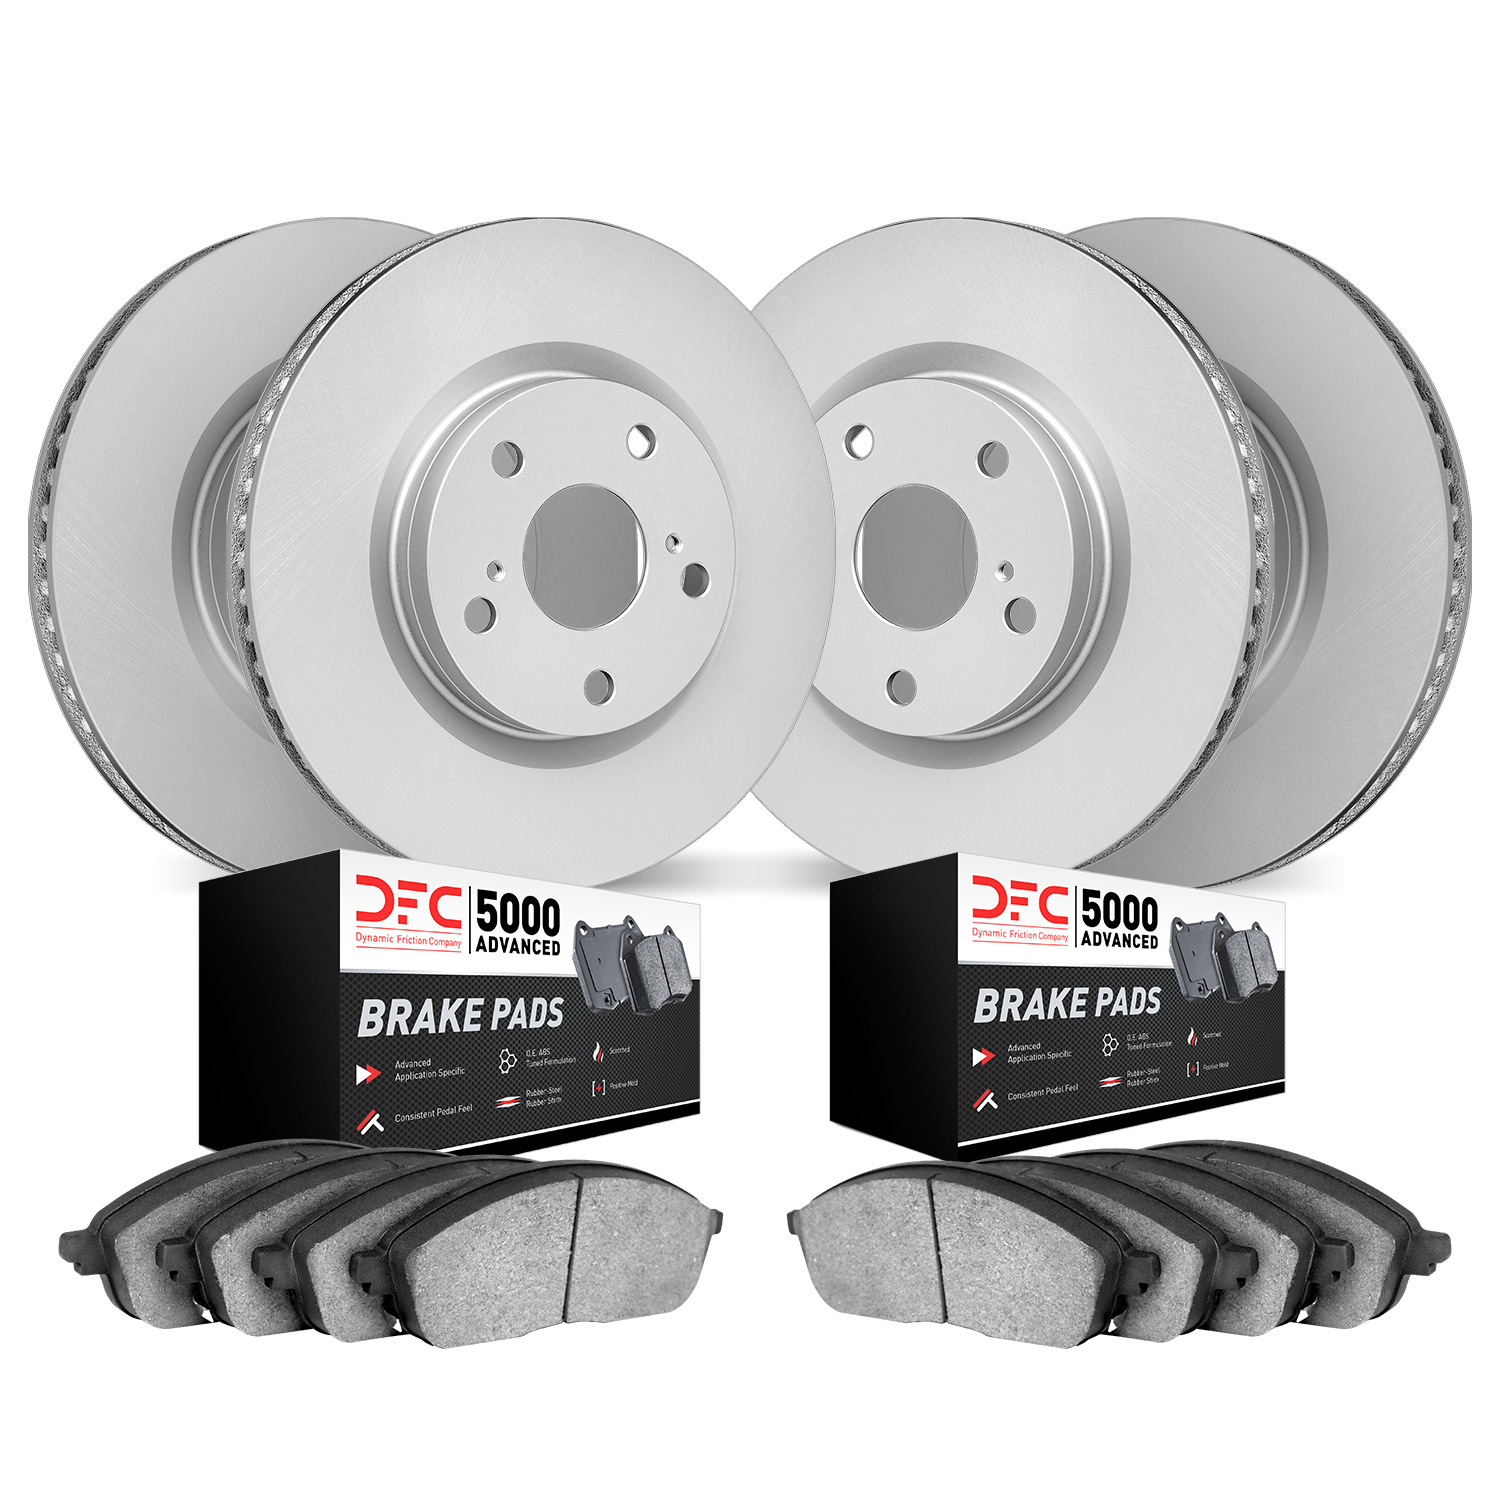 4504-31070 Geospec Brake Rotors w/5000 Advanced Brake Pads Kit, Fits Select BMW, Position: Front and Rear